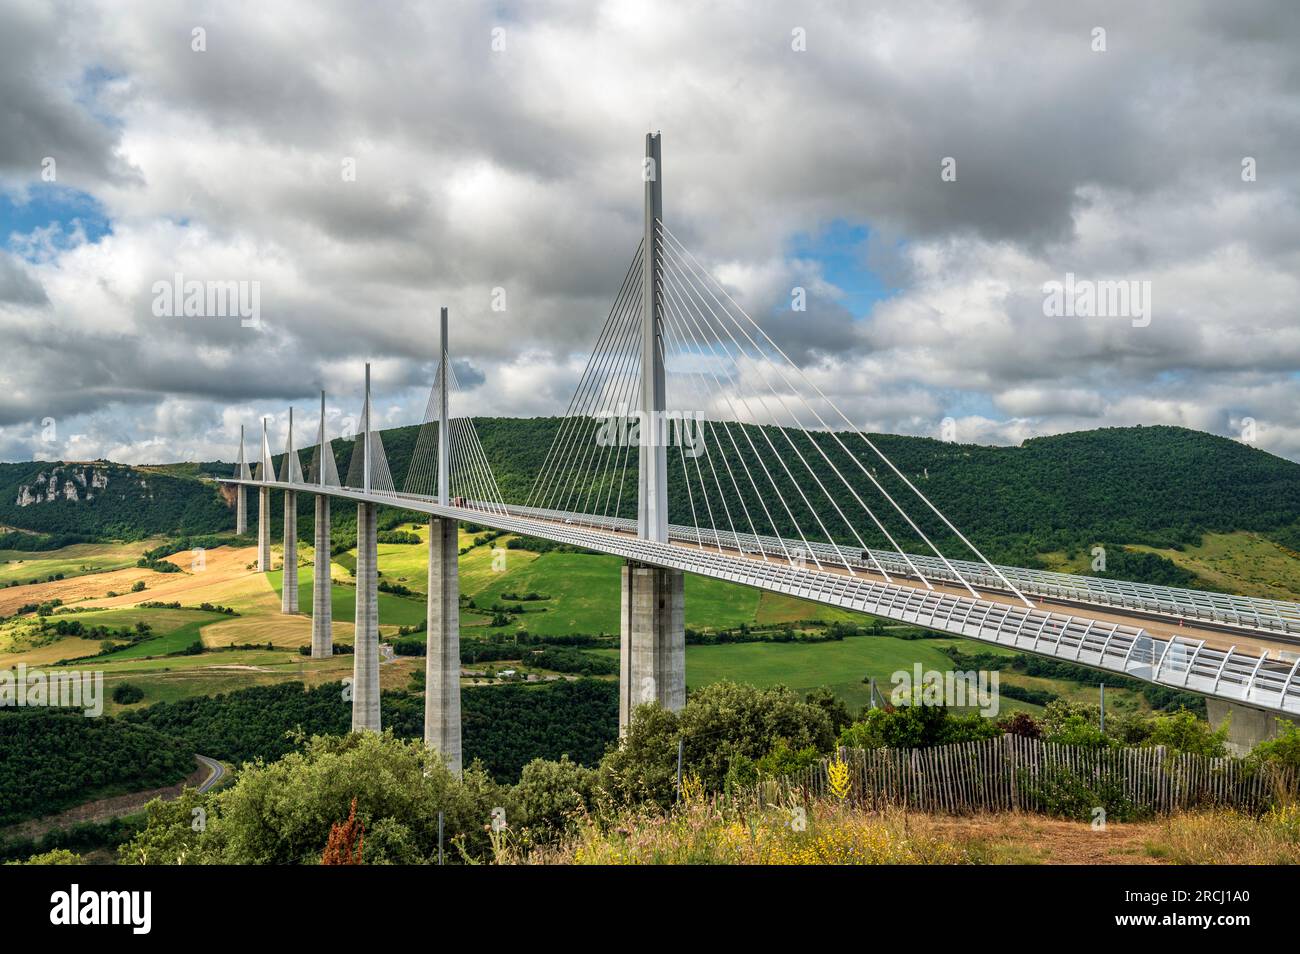 The Millau viaduct of the A75 motorway crossing the Tarn valley in Occitanie, France Stock Photo